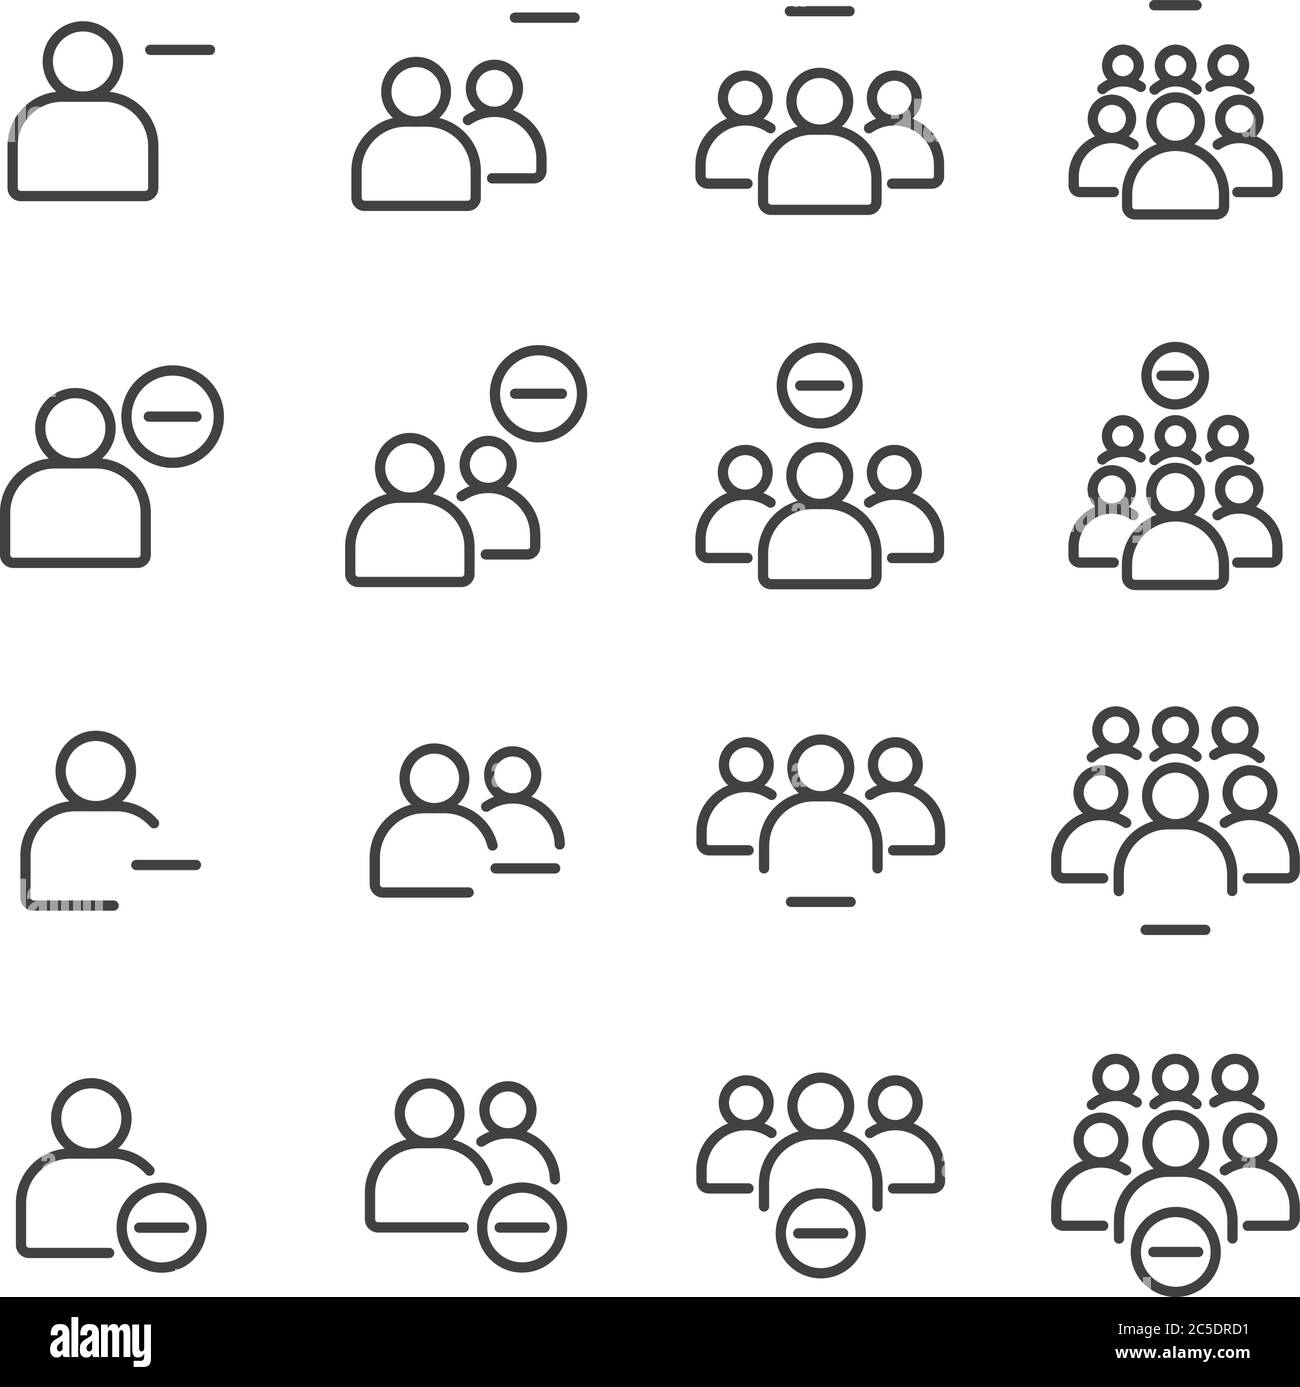 Simple Set of Business People Related Vector flat Line Icons. Contains such as teamwork, group of people, colleague, negative, deleted, dismissed and Stock Vector